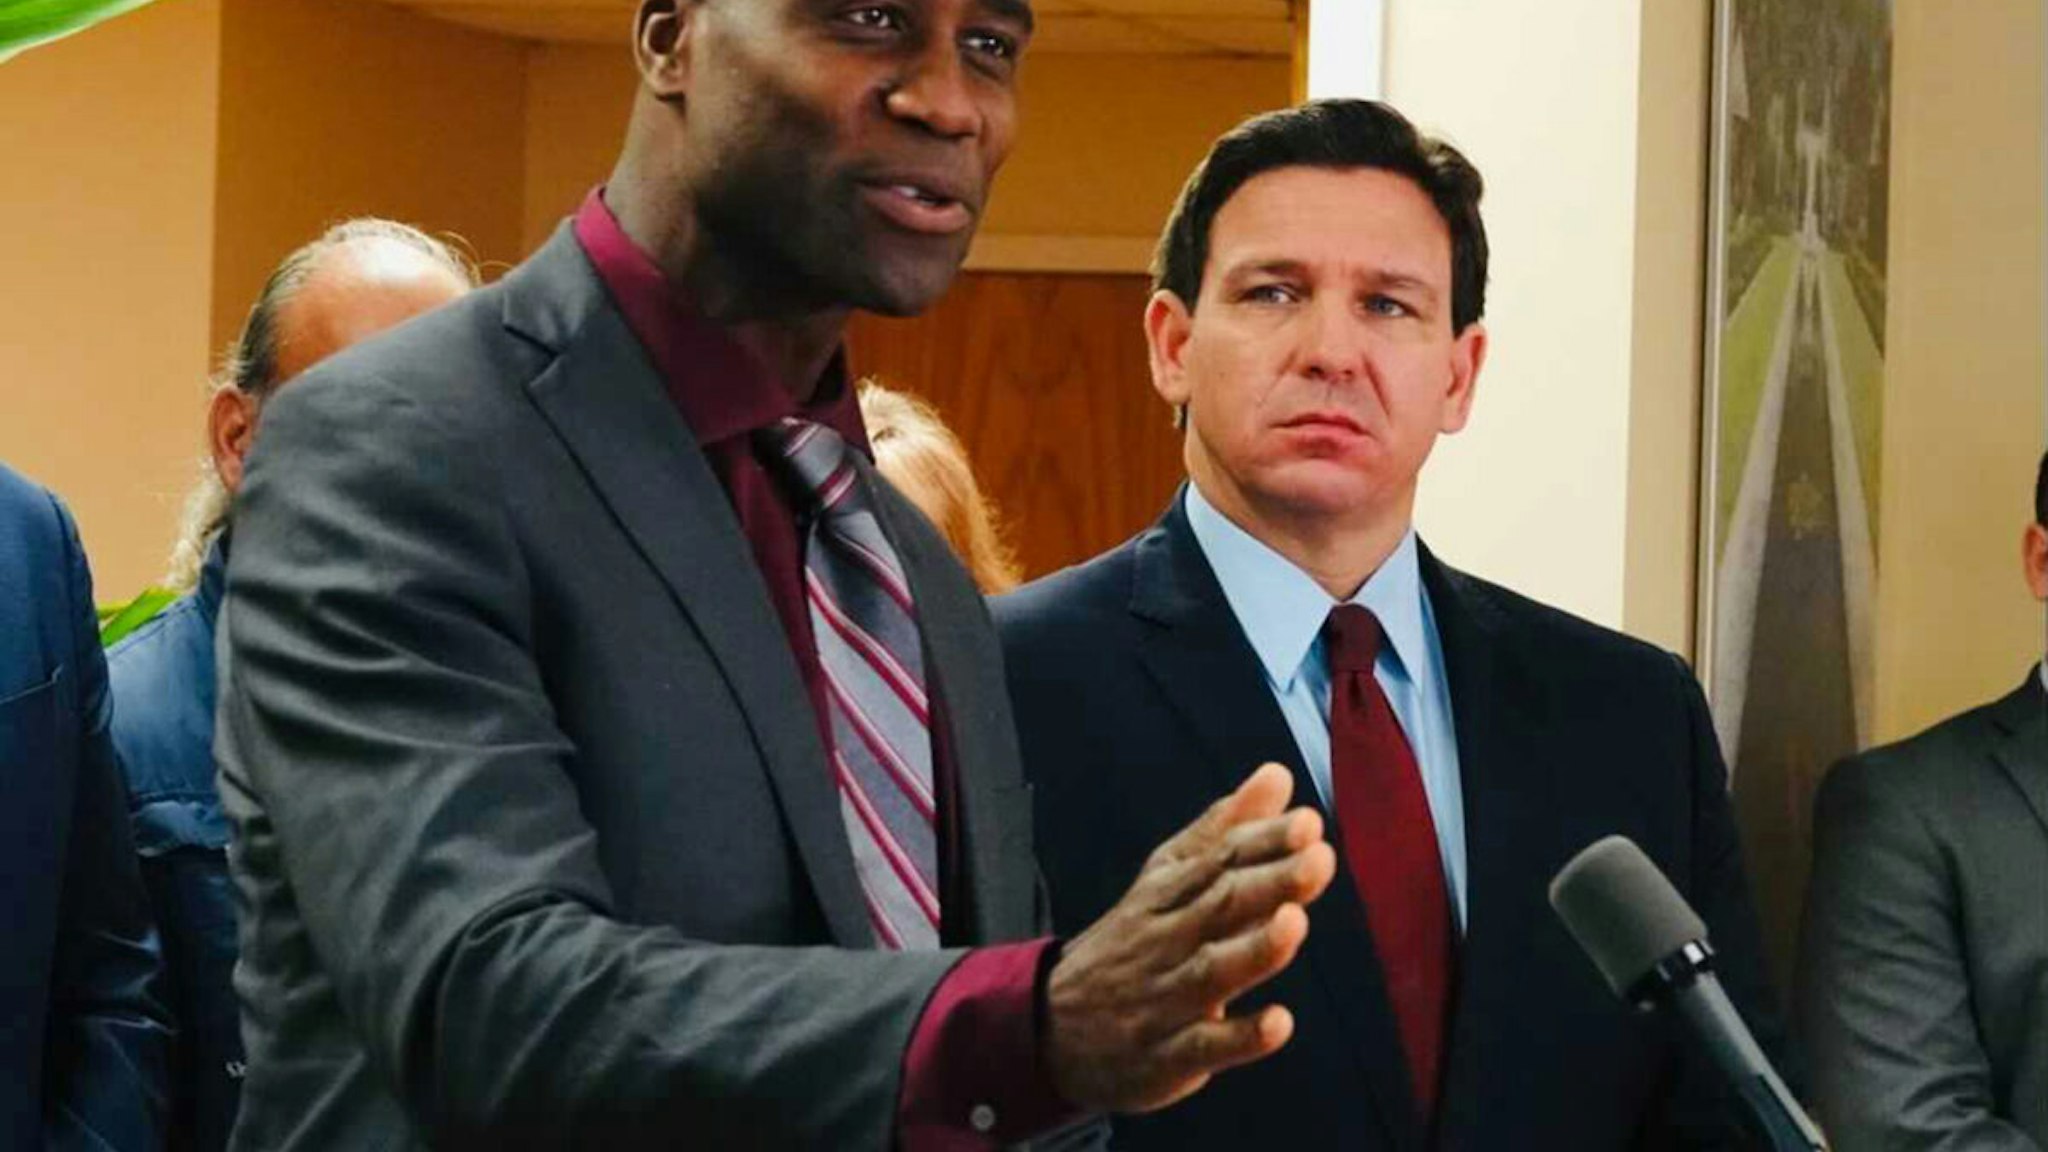 Florida Surgeon General Joseph Ladapo and Gov. Ron DeSantis at a news conference in West Palm Beach, Florida on Thursday, Jan. 6, 2022.